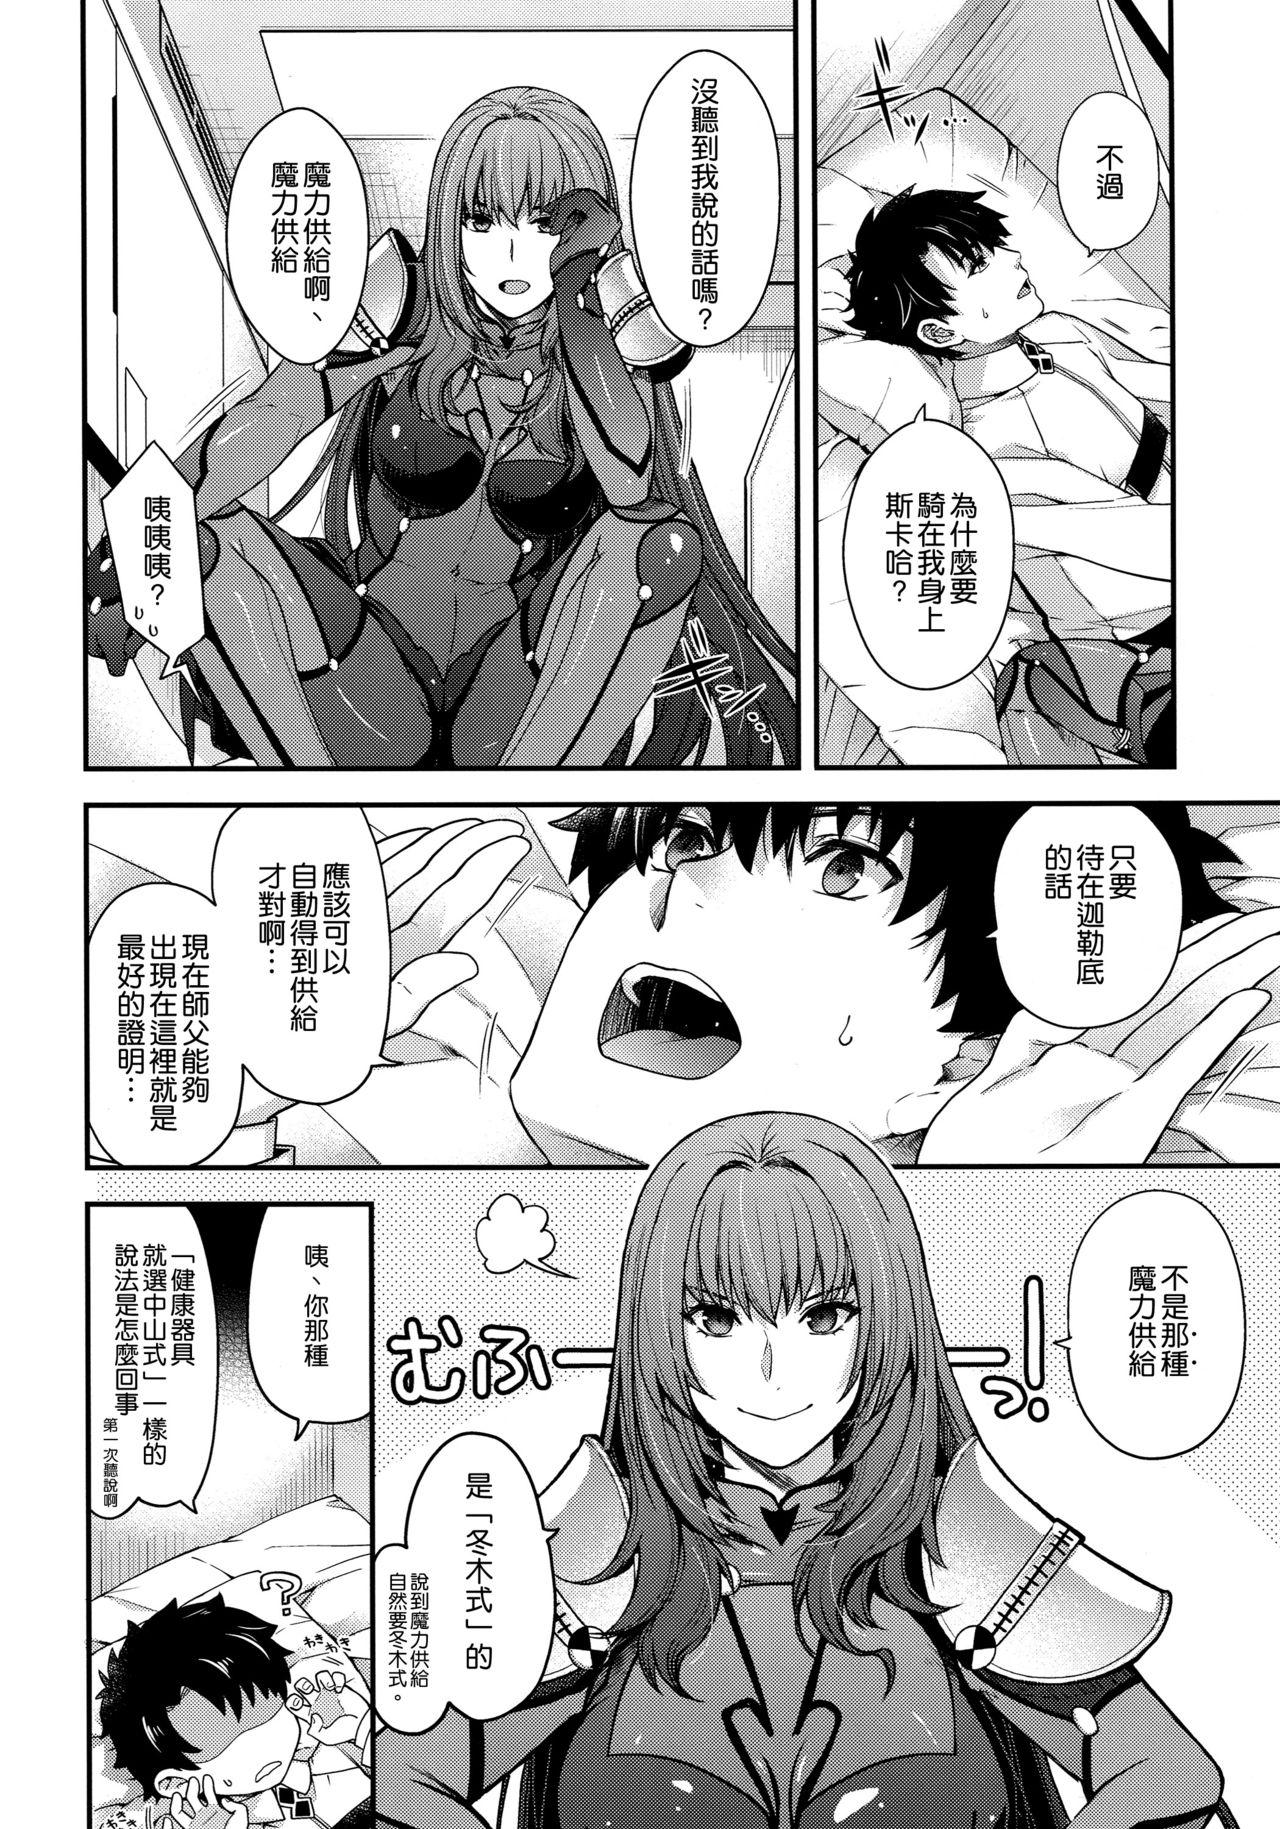 Face parthas - Fate grand order Gordita - Page 4